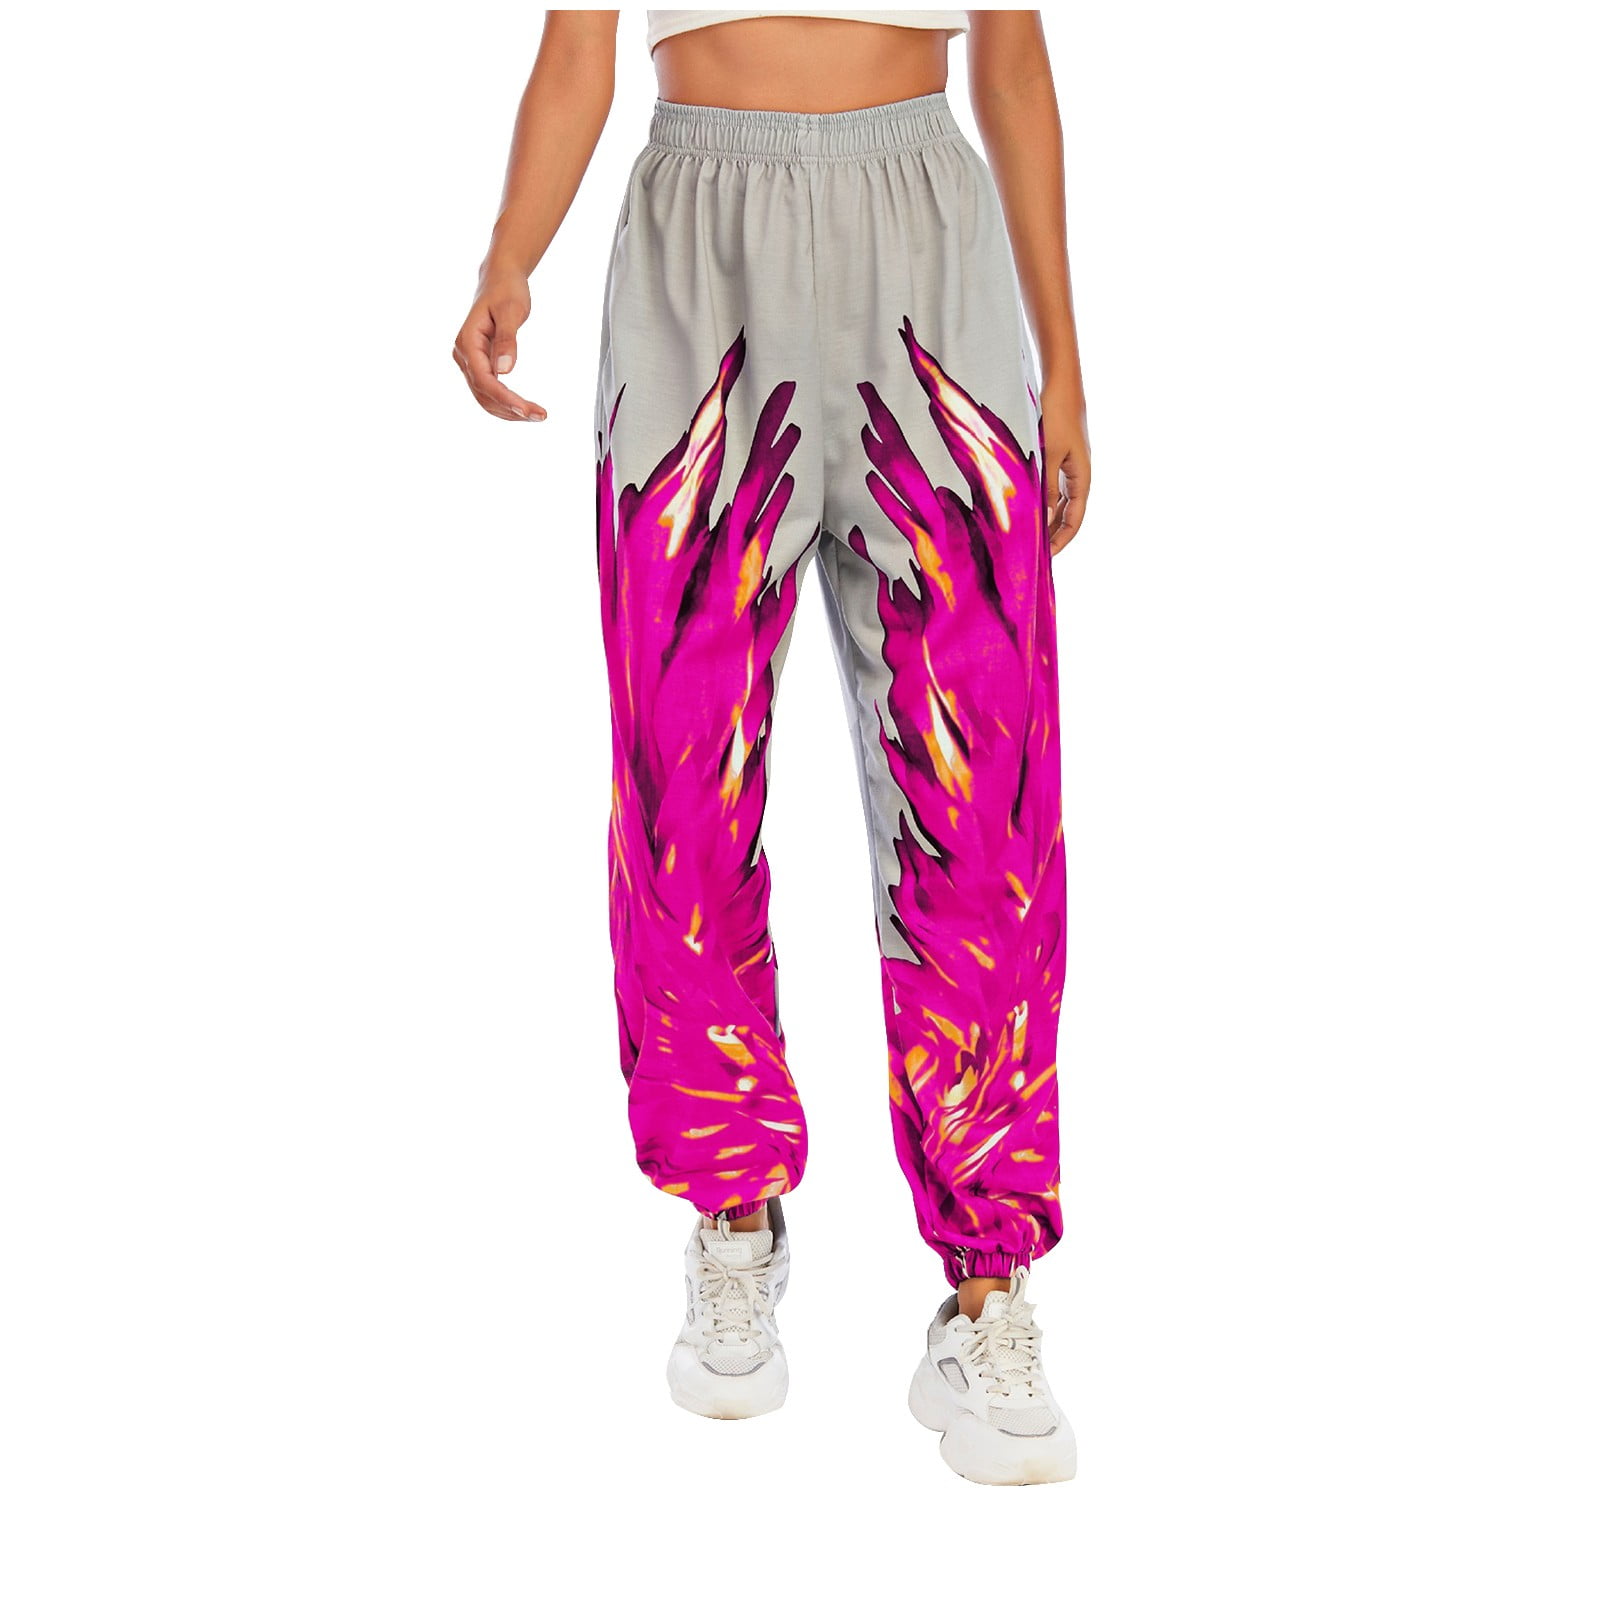 Women's Perfectly Cozy Lounge Jogger Pants - Stars Above™ Light